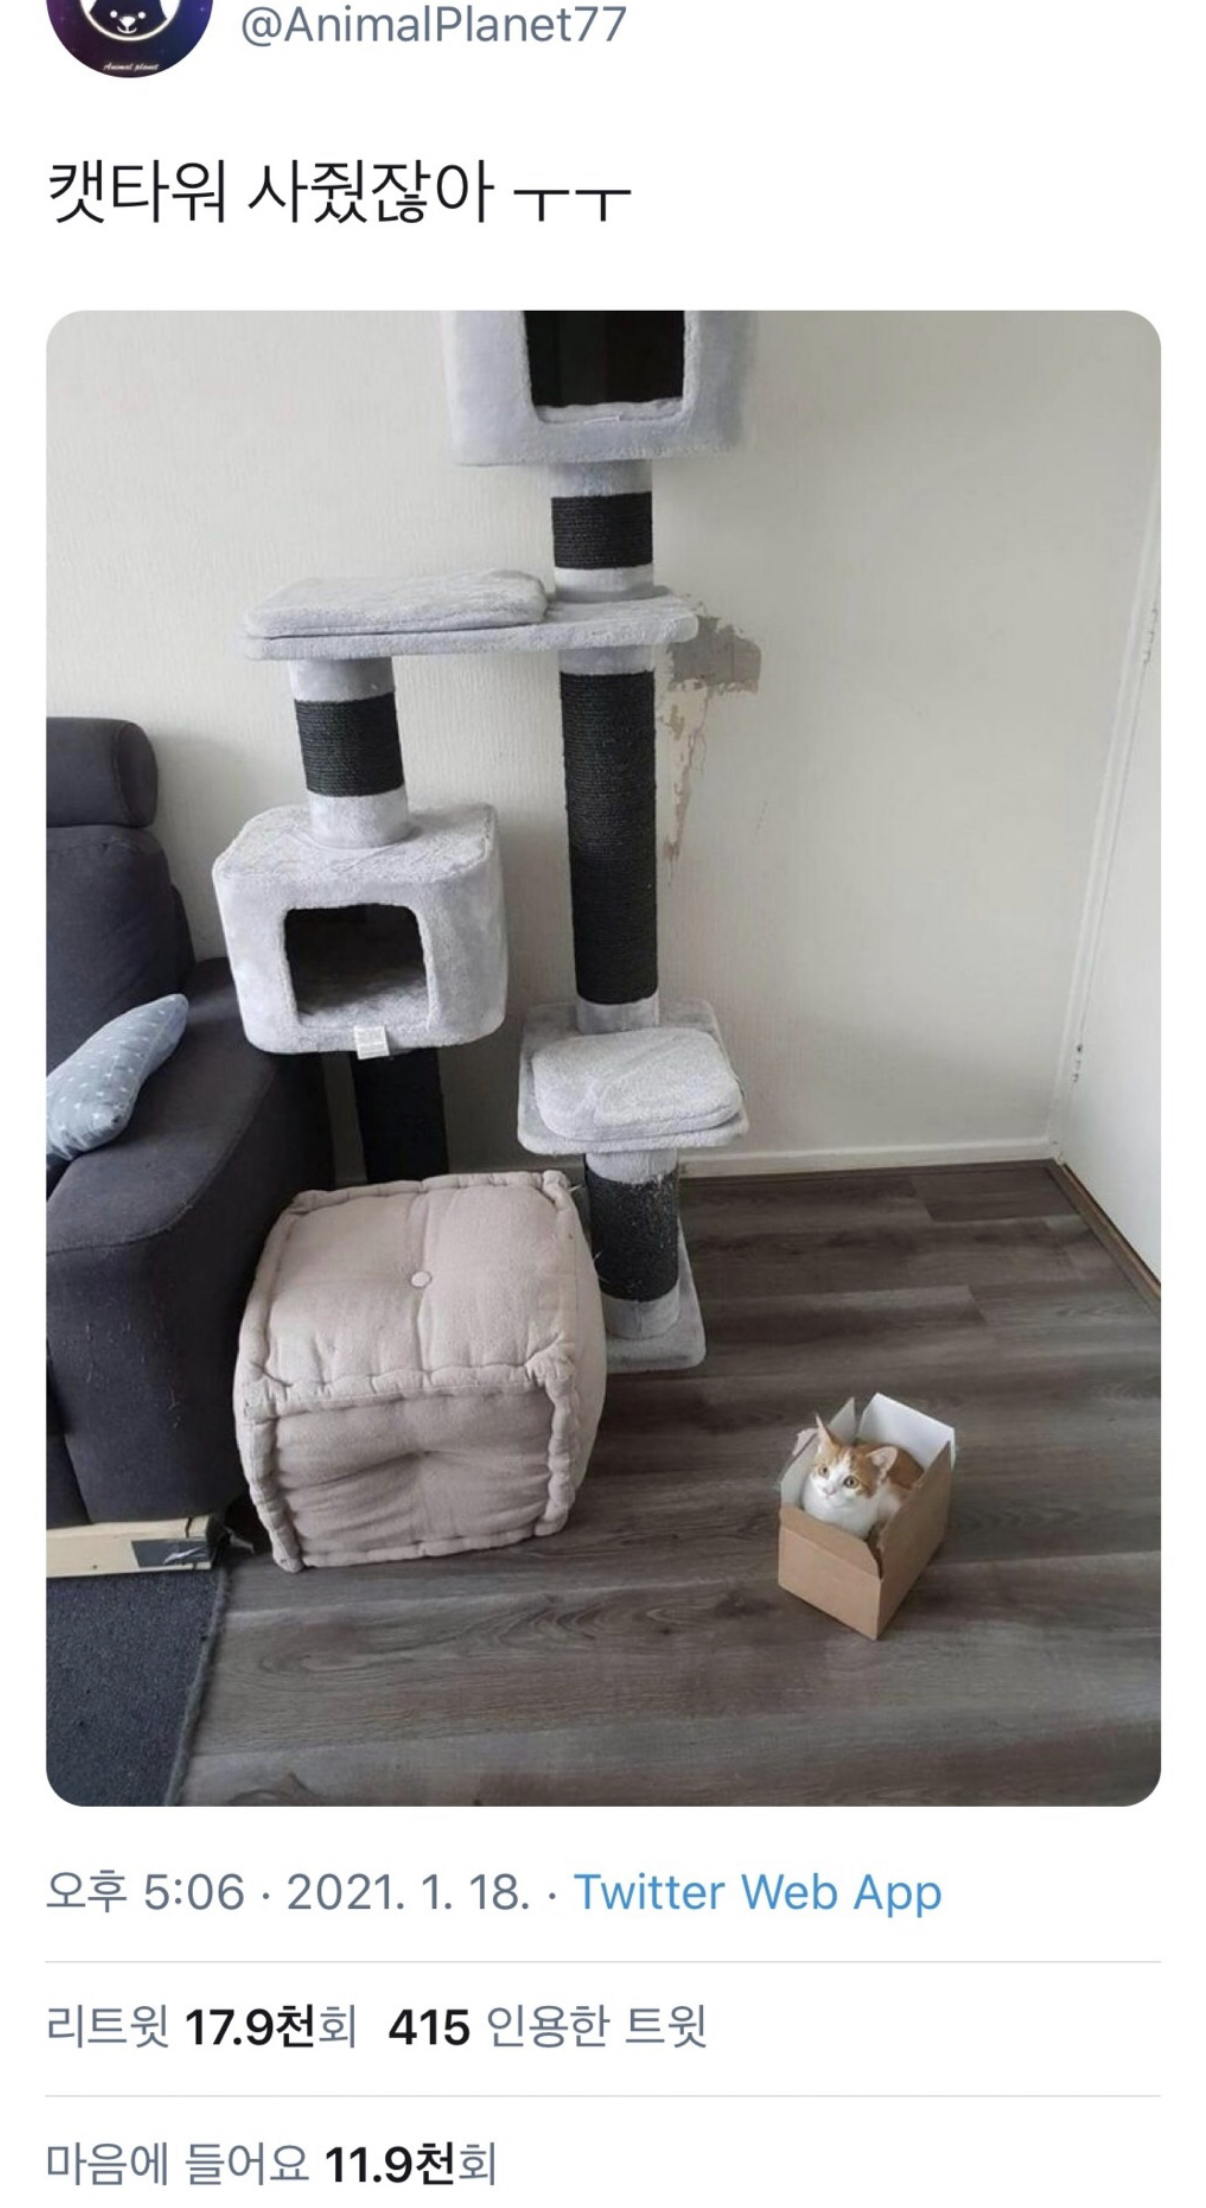 You bought me a cat tower.